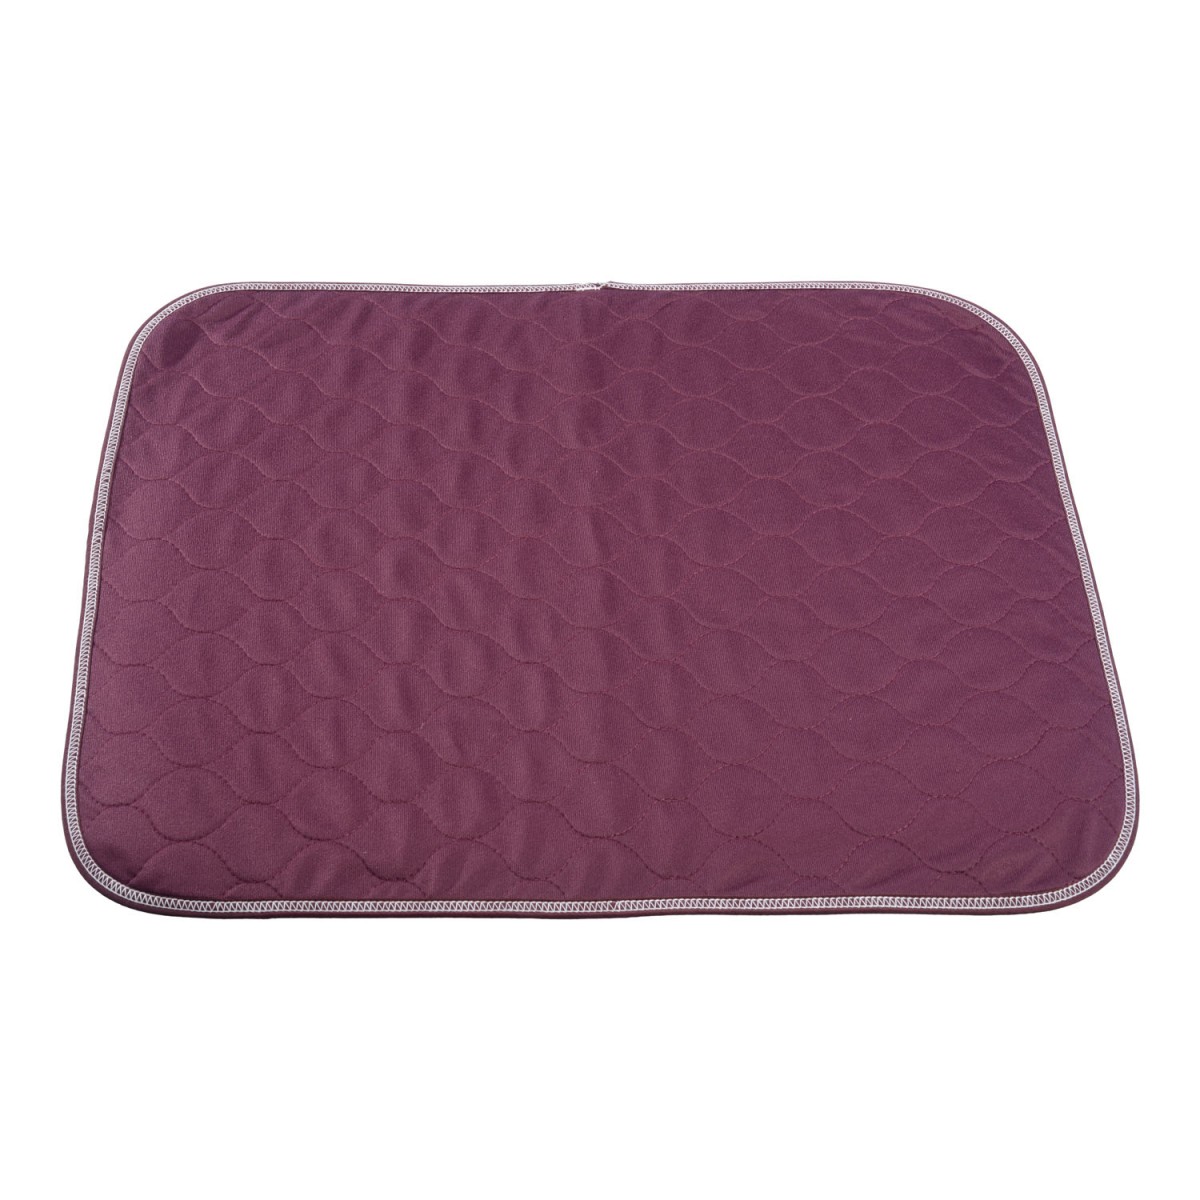 Deluxe Chair Pad Waterproof Backing, 60 x 50cm - Various Colours